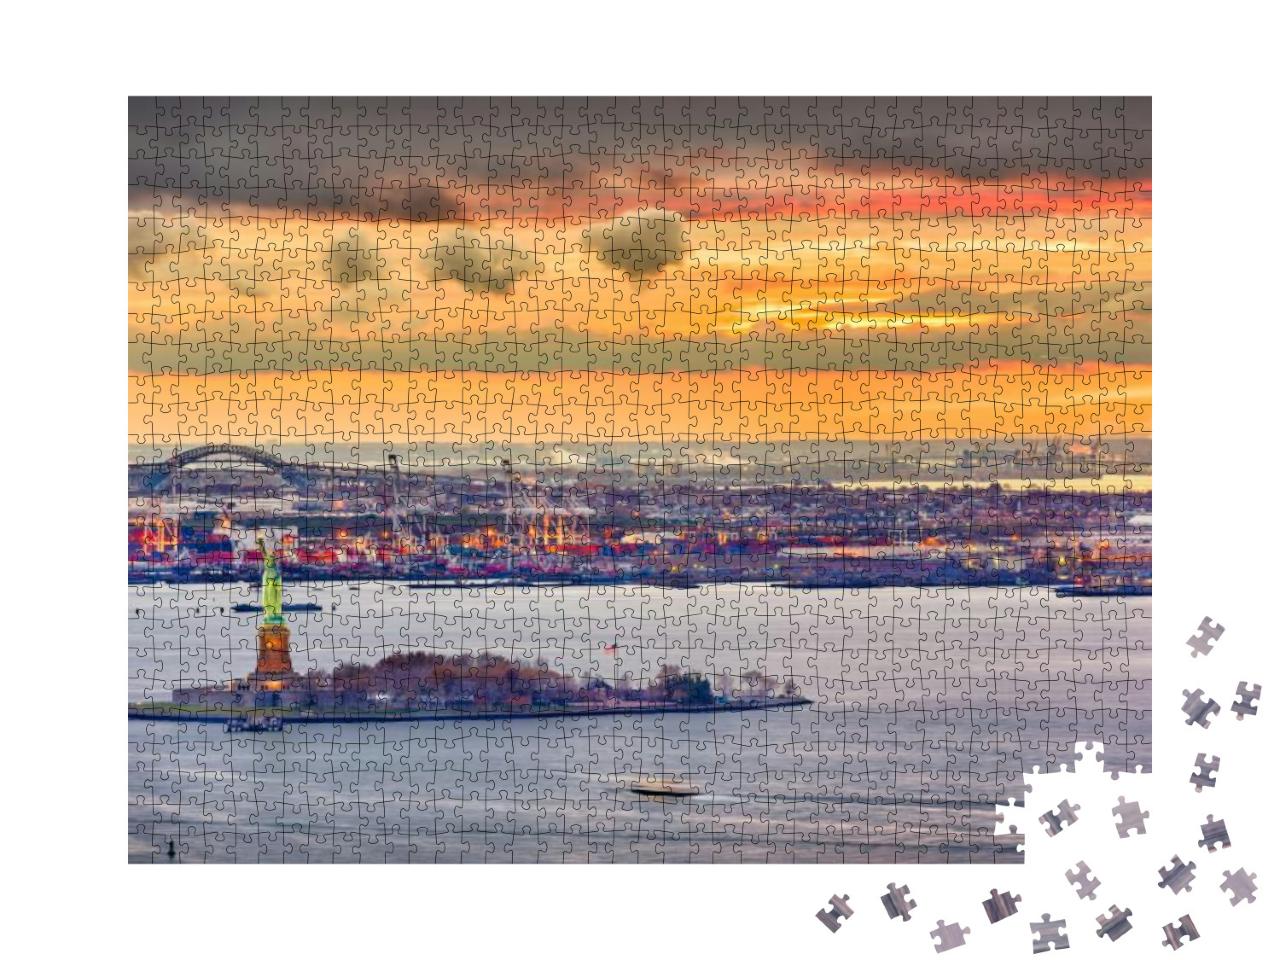 New York Harbor, New York, USA with the Statue of Liberty... Jigsaw Puzzle with 1000 pieces